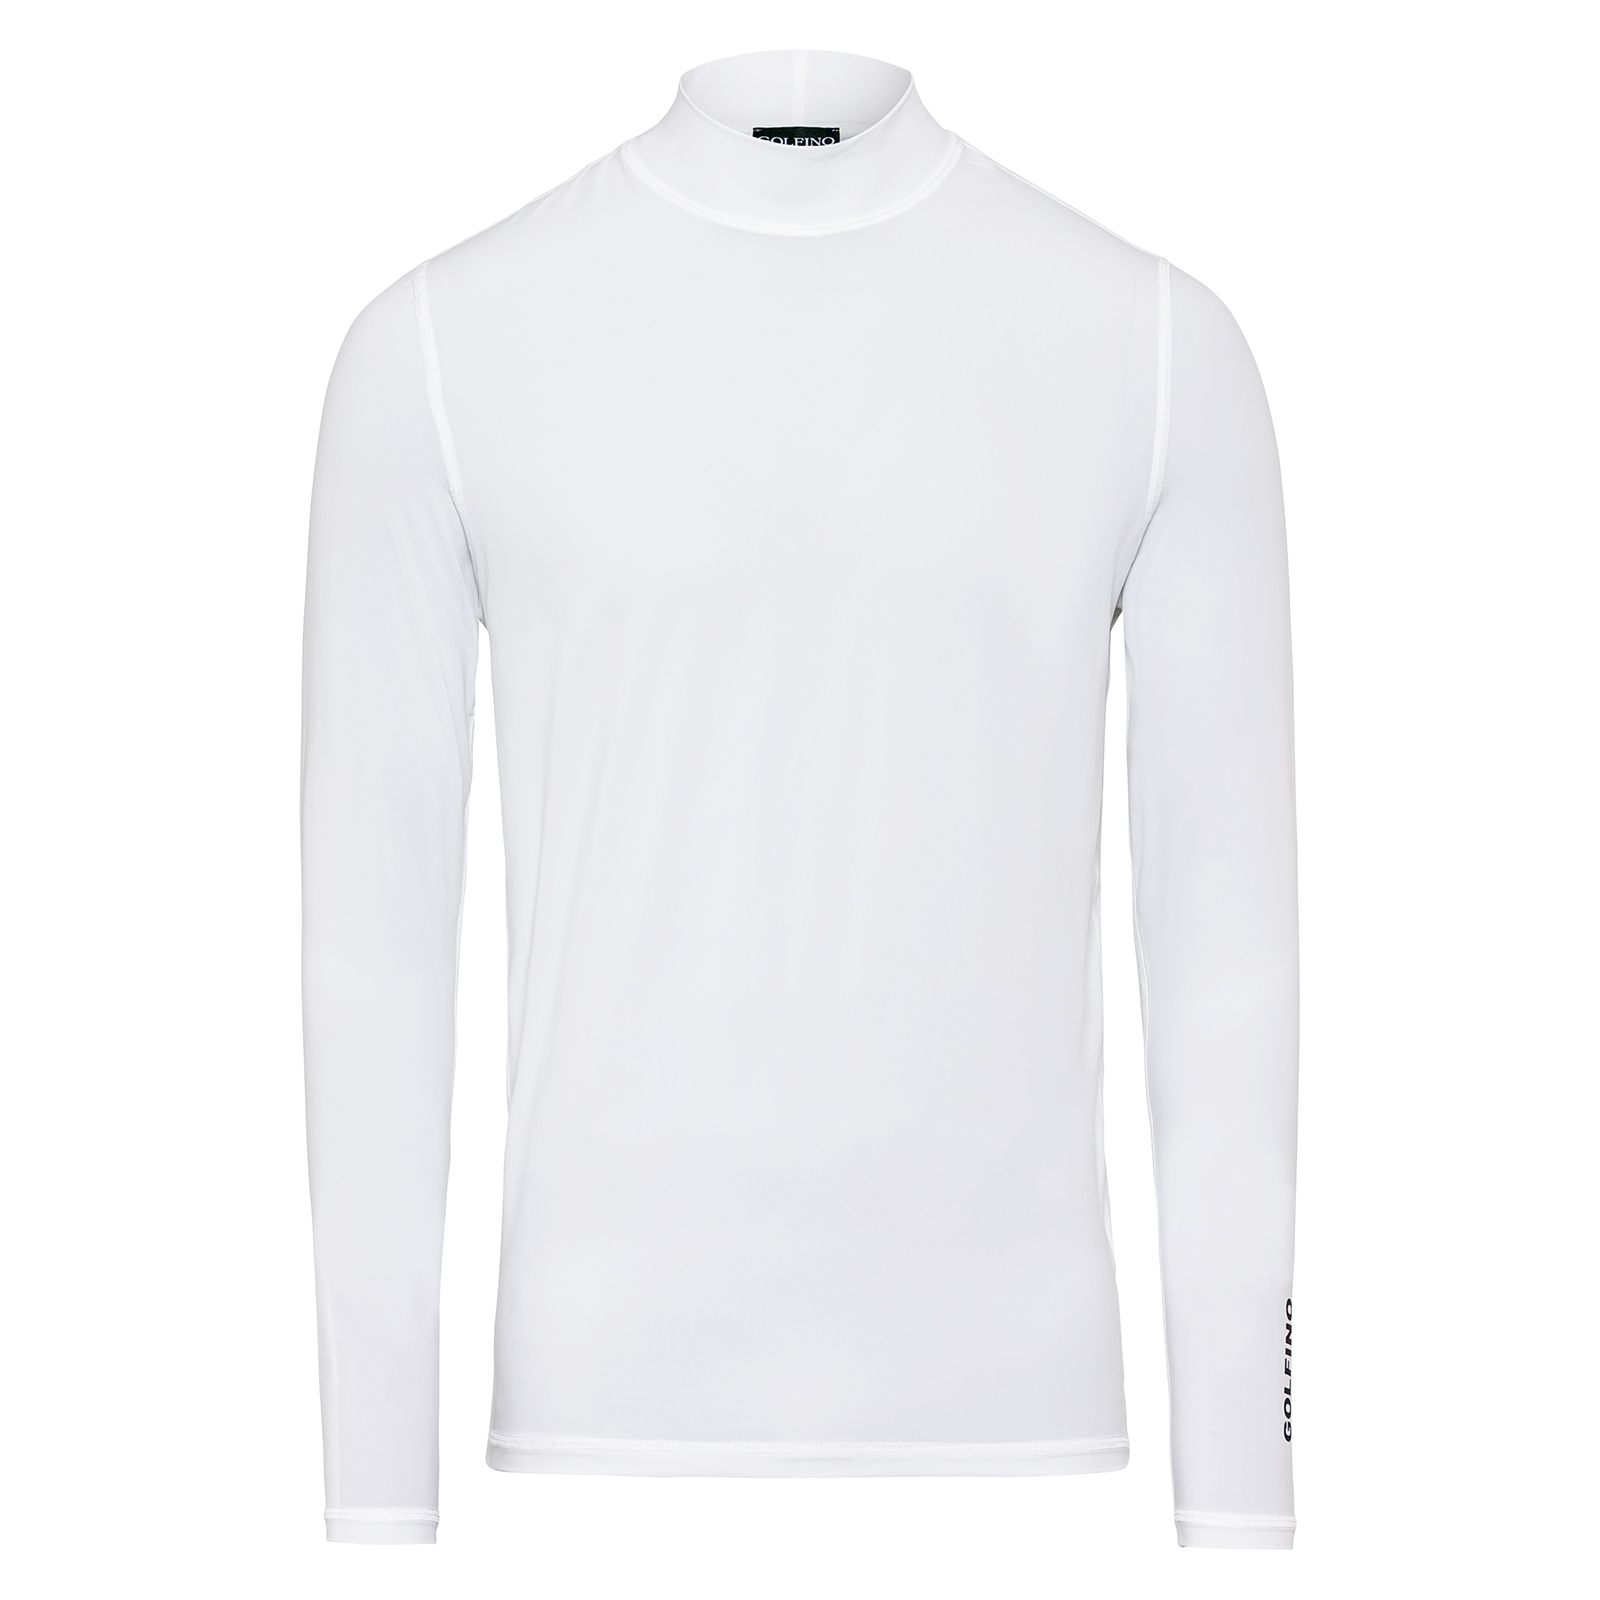 Men's long-sleeved shirt with ultraviolet protection factor 